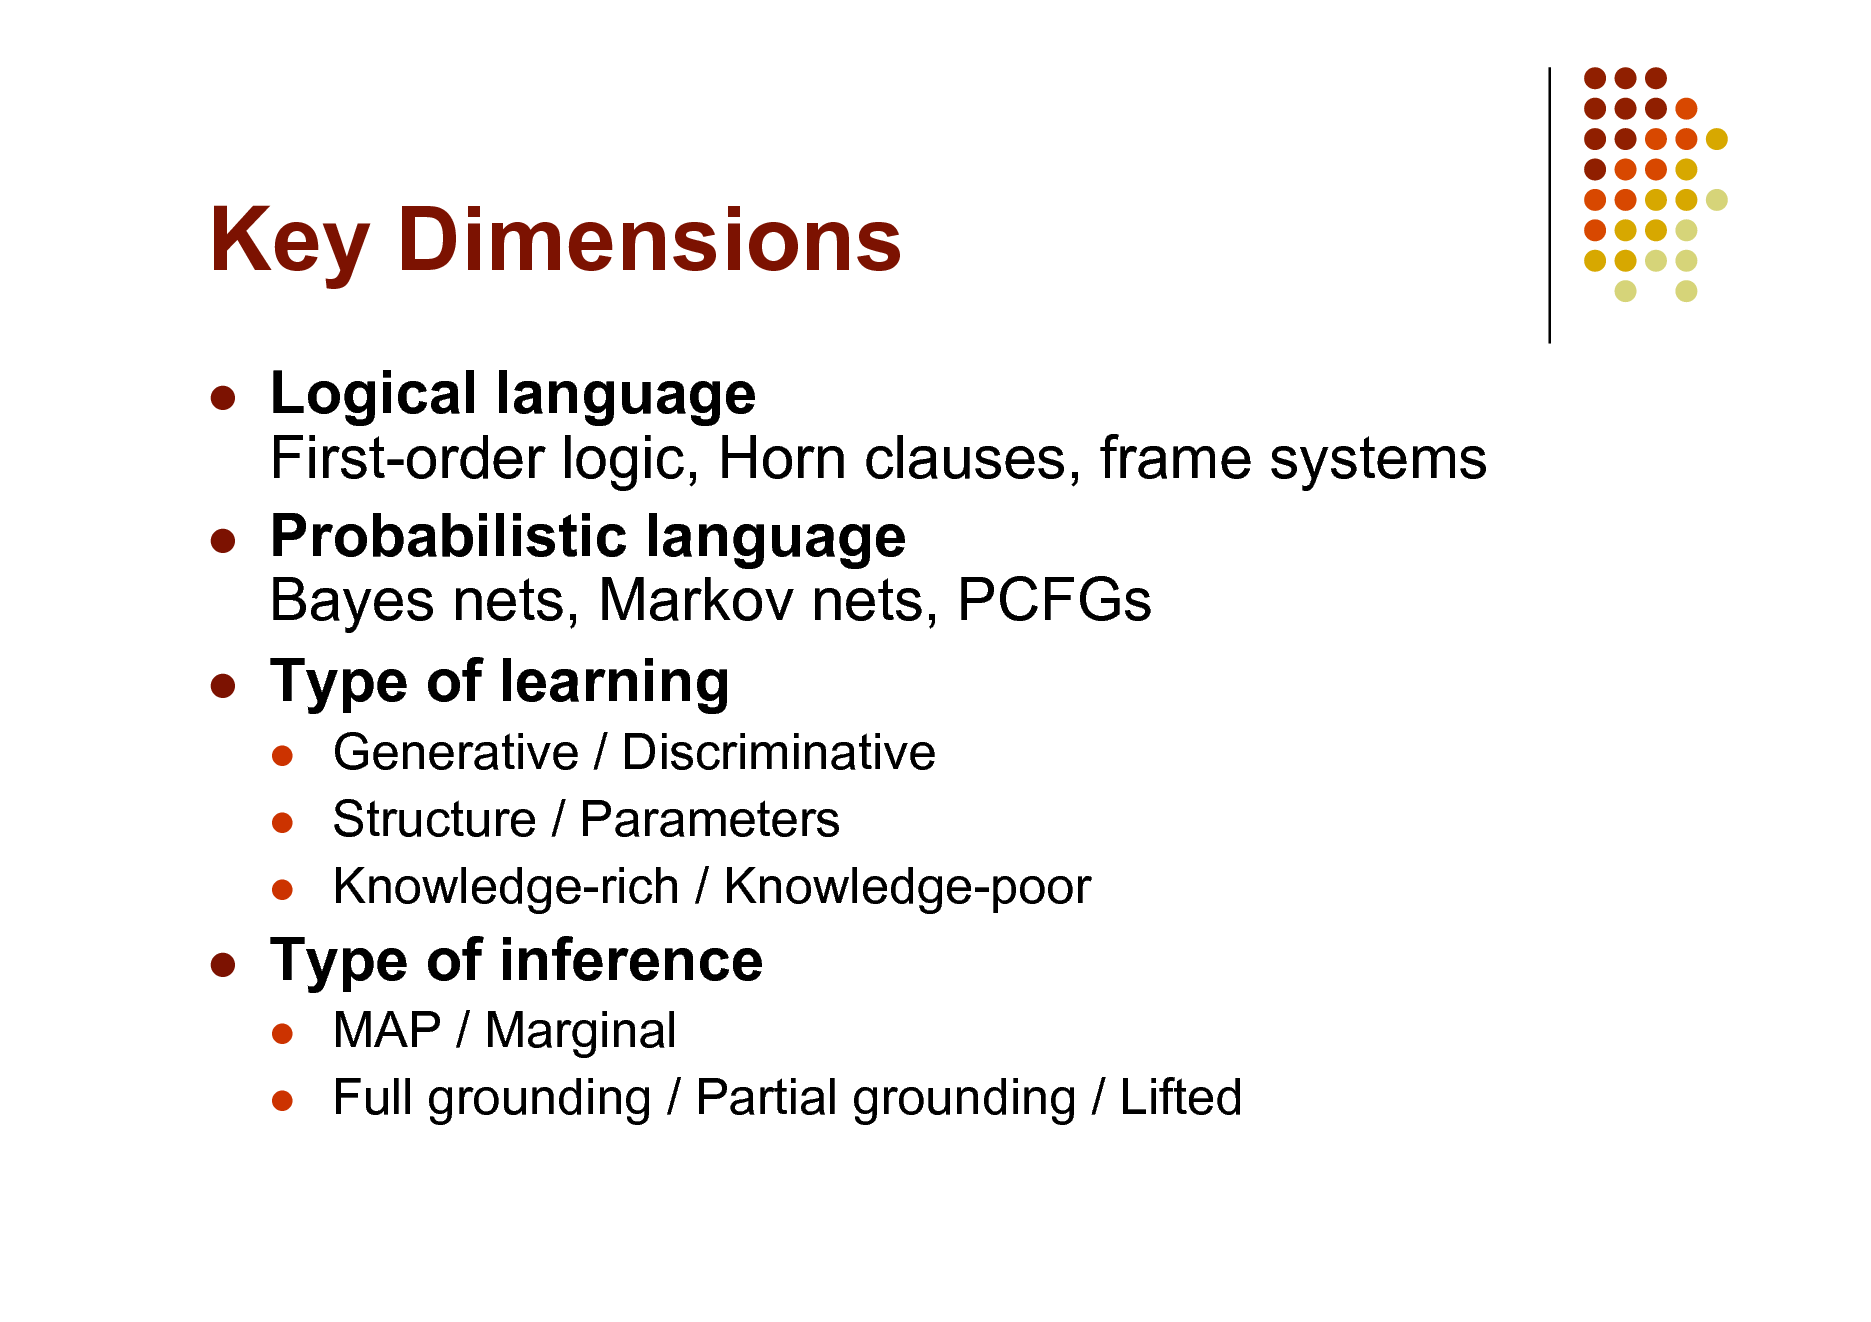 Slide: Key Dimensions
  

Logical language First-order logic, Horn clauses, frame systems Probabilistic language Bayes nets, Markov nets, PCFGs Type of learning
  

Generative / Discriminative Structure / Parameters Knowledge-rich / Knowledge-poor MAP / Marginal Full grounding / Partial grounding / Lifted



Type of inference
 

